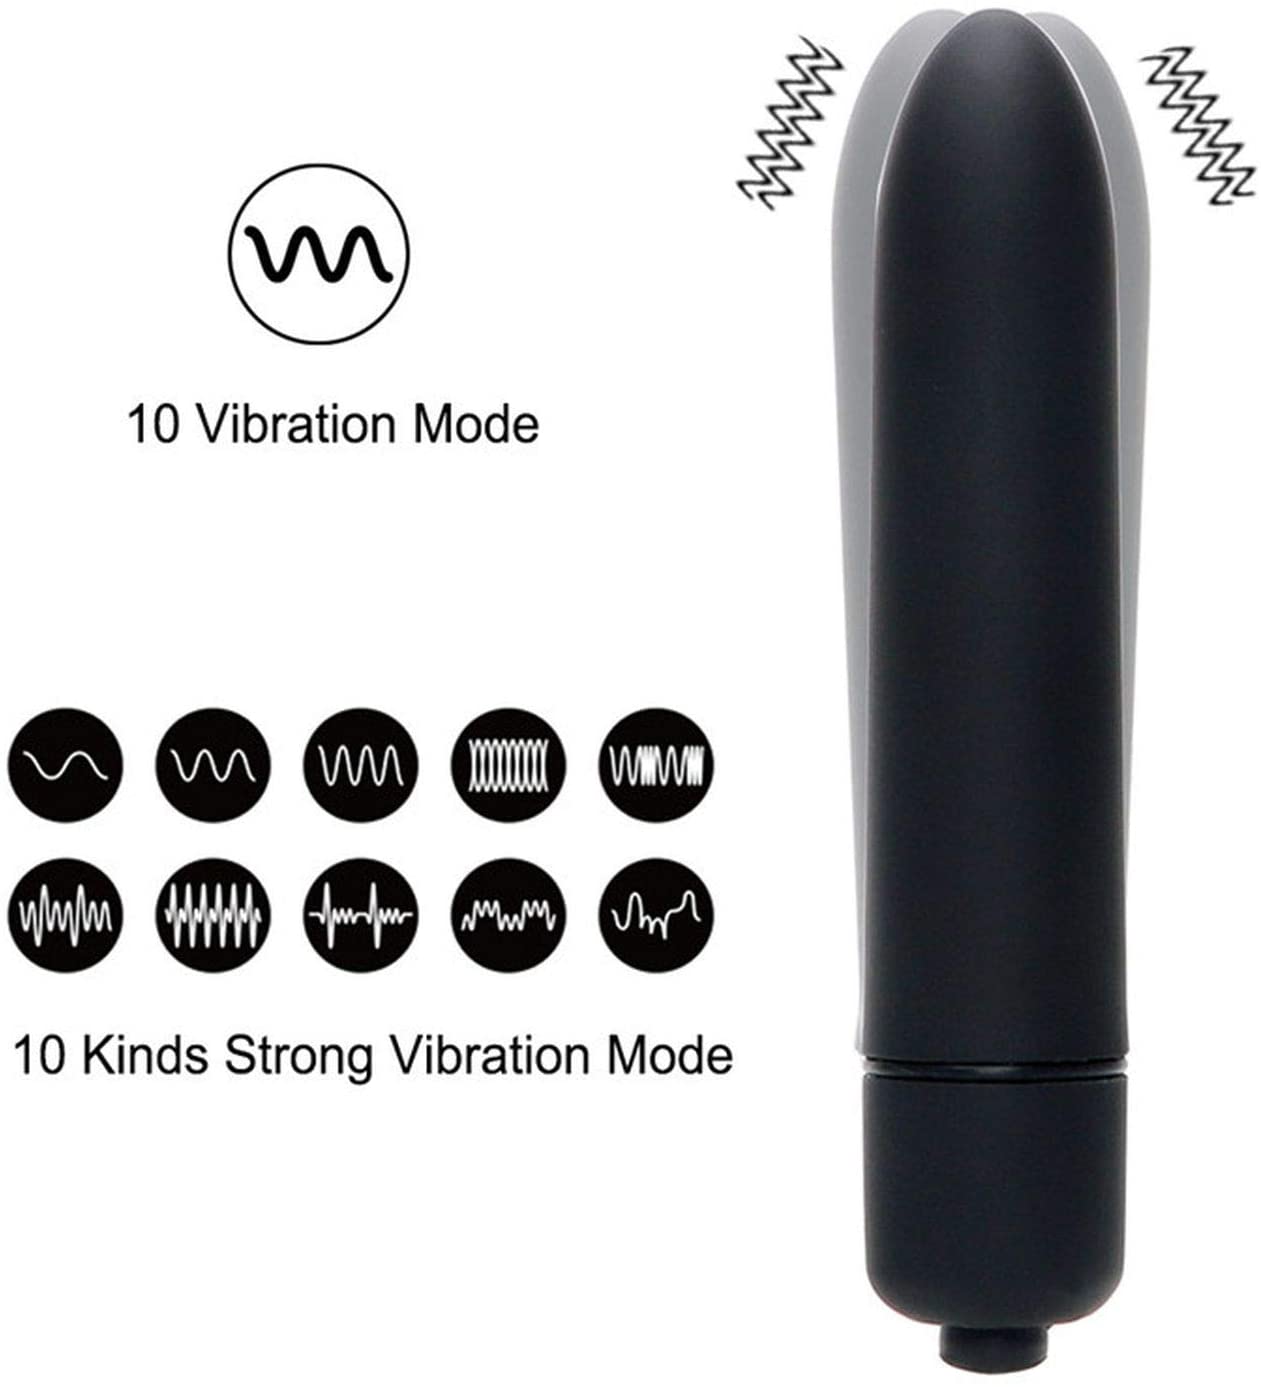 Powerful Bullet Vibrator with 10 Modes, Portable Mini Pocket Vagina Stimulator, Waterproof Super-Strong Adult Sex Toys for Women with Discreet Package